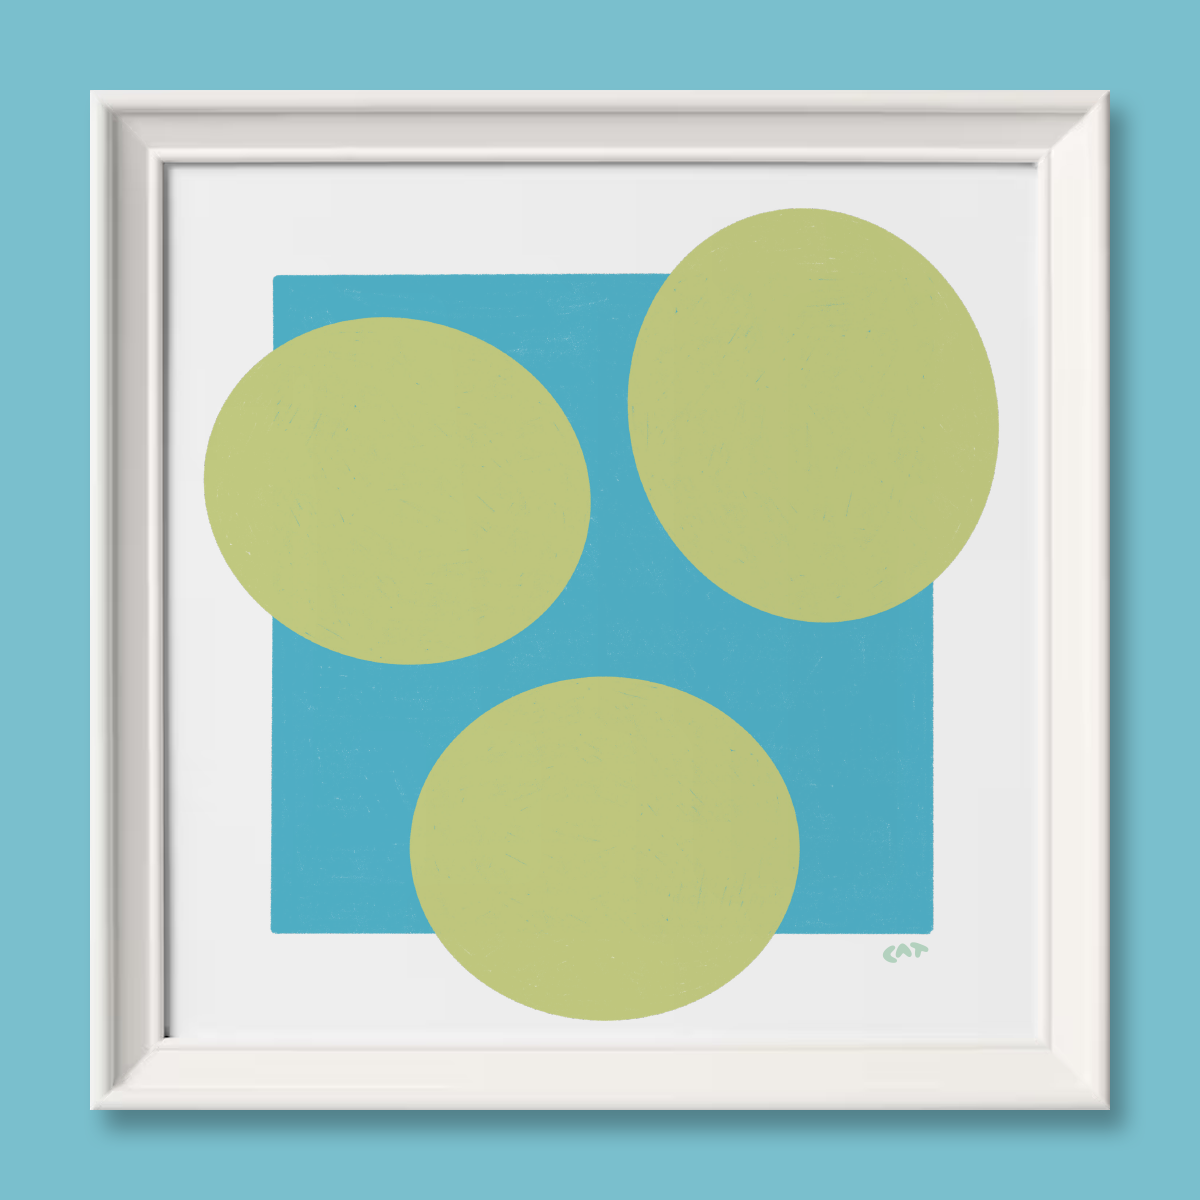 Framed art print of a blue rectangle with three green polka dots. The frame is white.